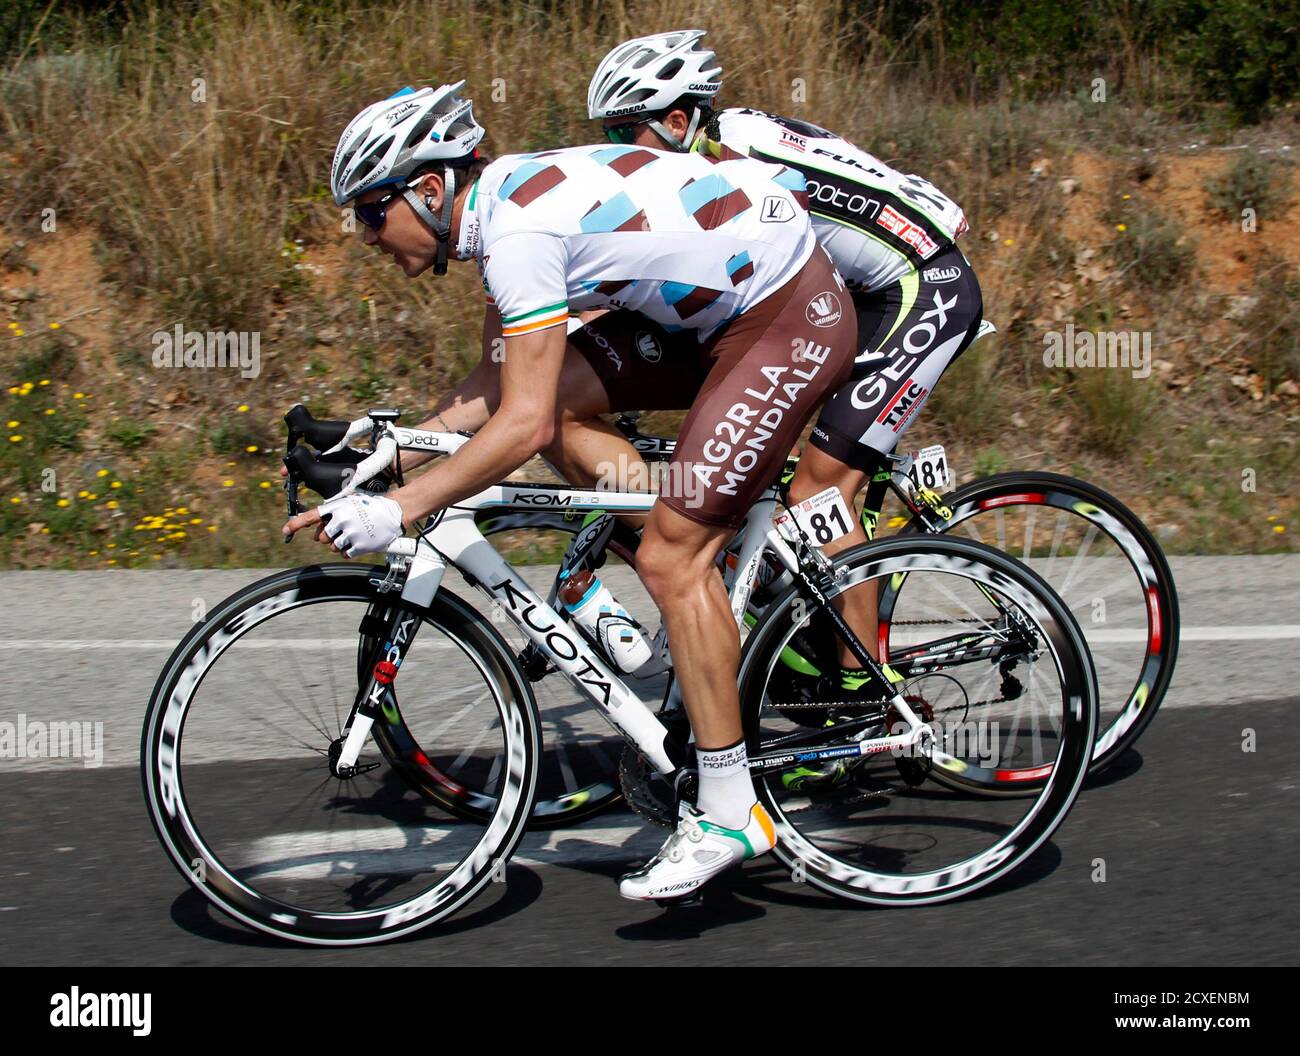 Ag2r's cyclist Nicolas Roche (L) of Ireland rides near Geox-Tmc's Carlos  Sastre of Spain during the 195 km fifth stage at the Tour of Catalunya  cycling race in Tarragona March 25, 2011.